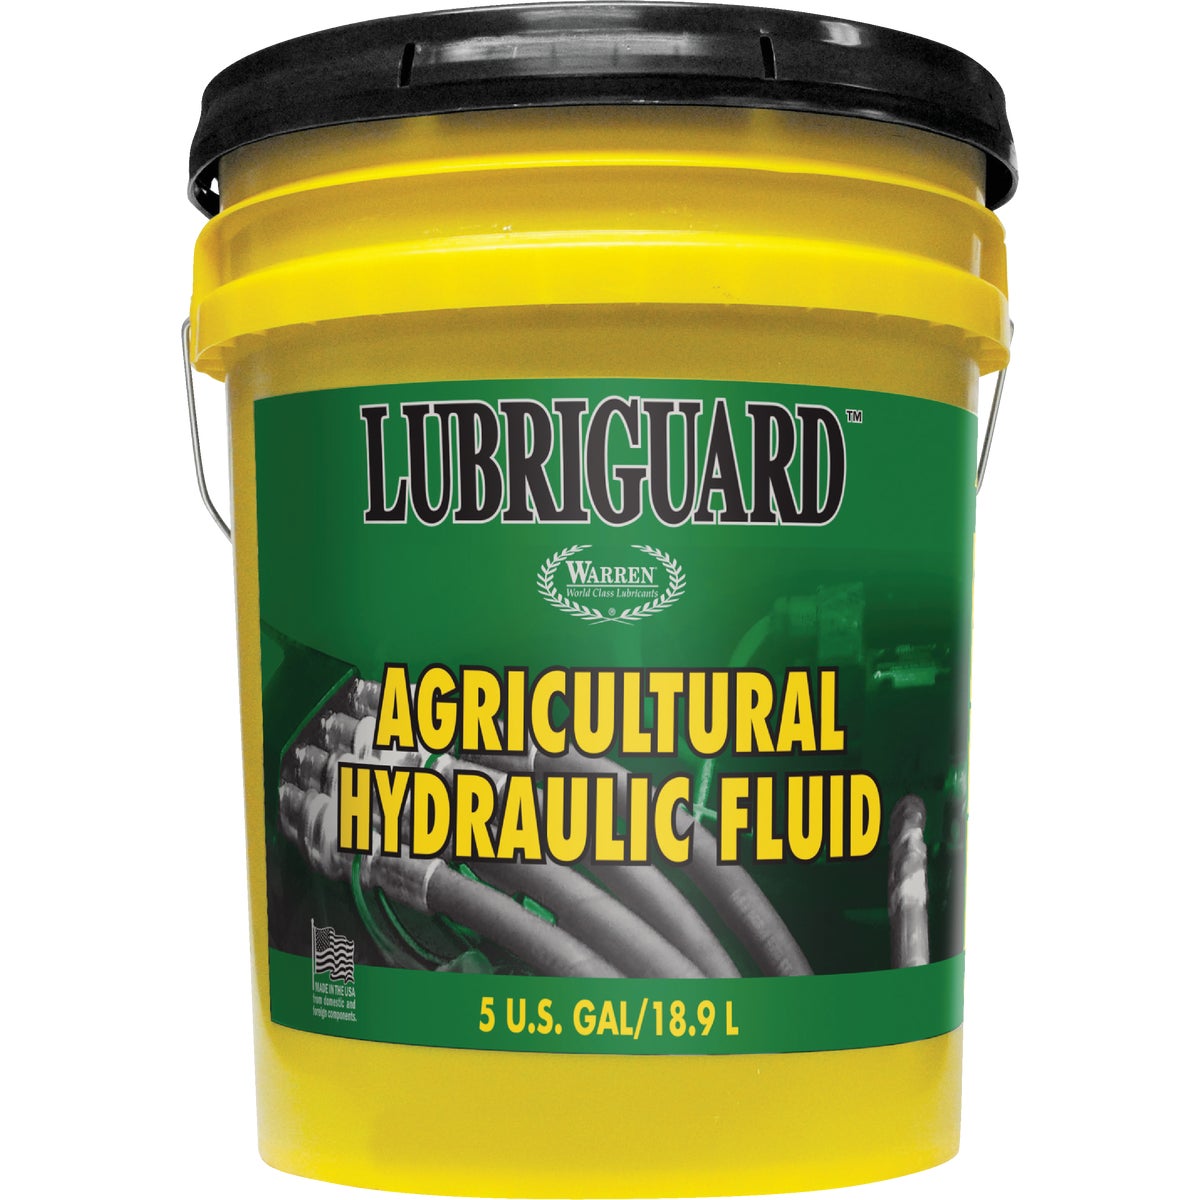 Item 574430, Gold Band quality agricultural hydraulic oils are blended with highly 